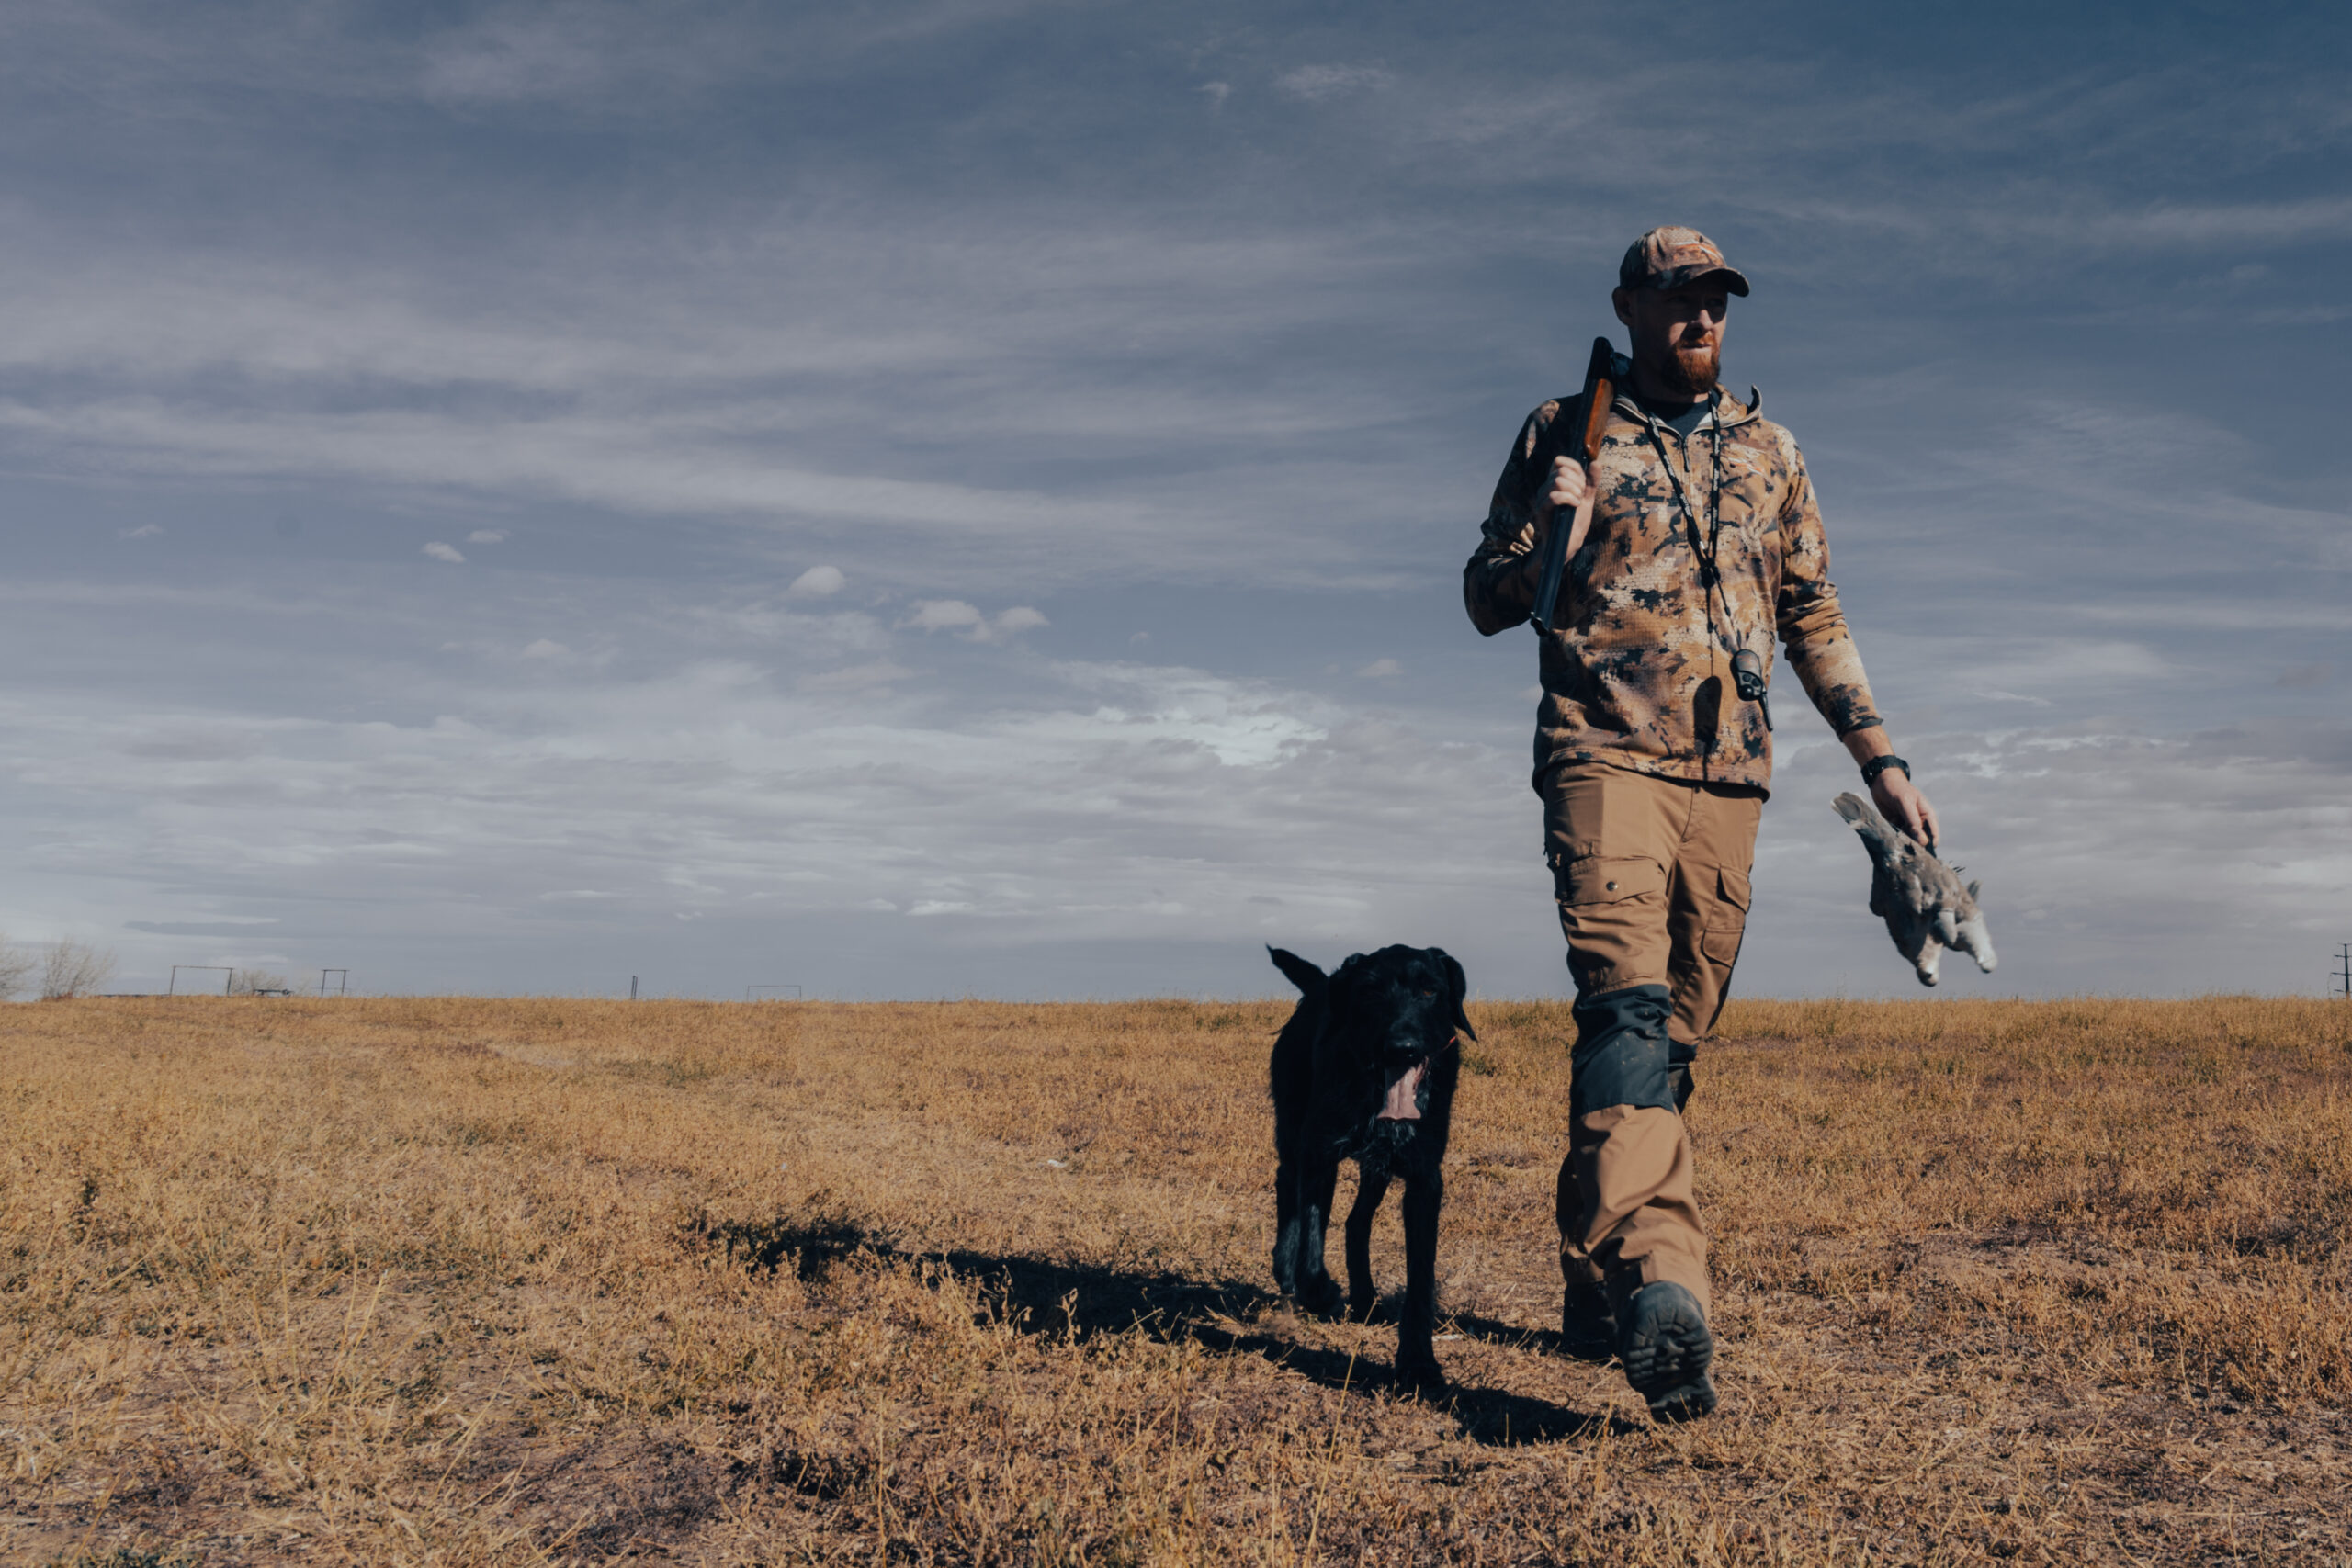 An Airbnb Service for Hunting and Fishing? Could It Work?